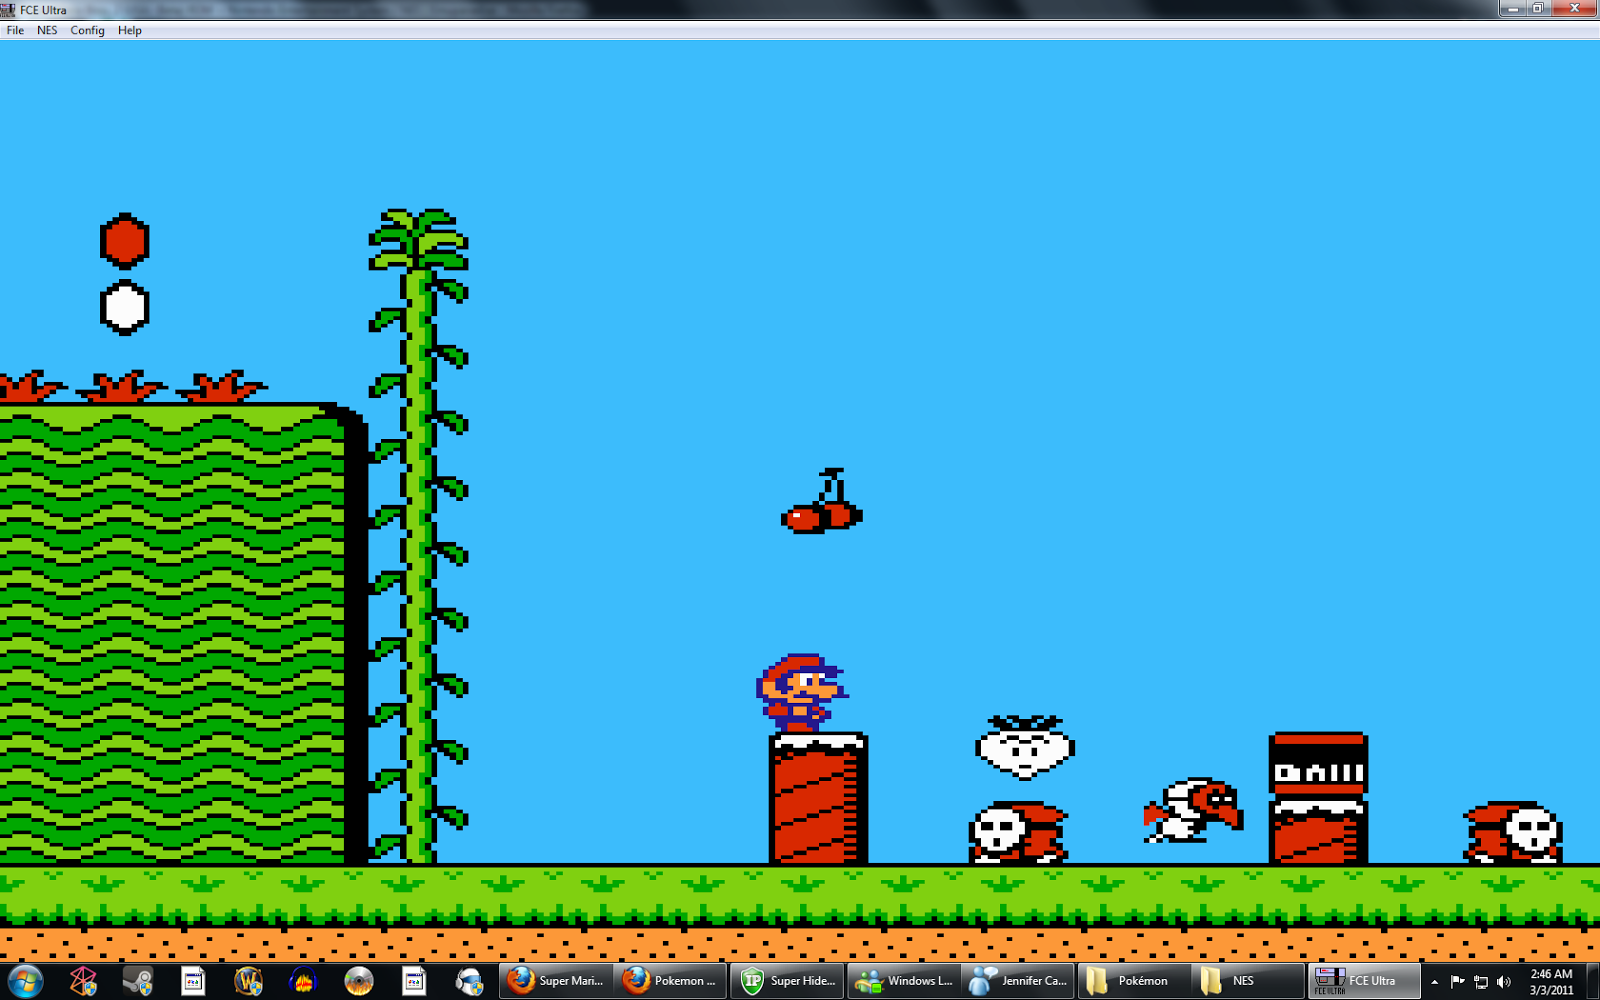 Best Super Mario Games On Pc 1985 Download Full Free